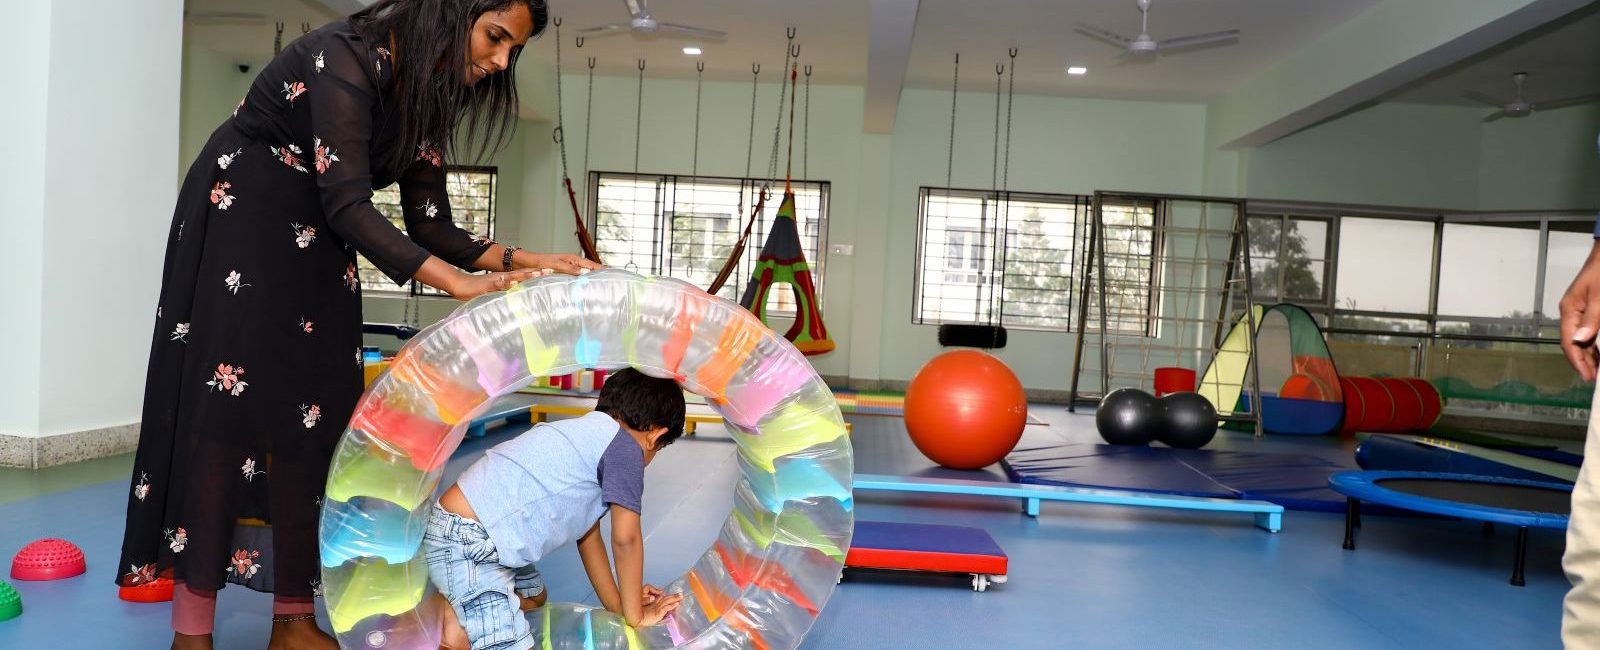 Occupational therapy dept - Helping to improve balance, gross motor skills and proprioception in children with ADHD & Autism through the sensatrak